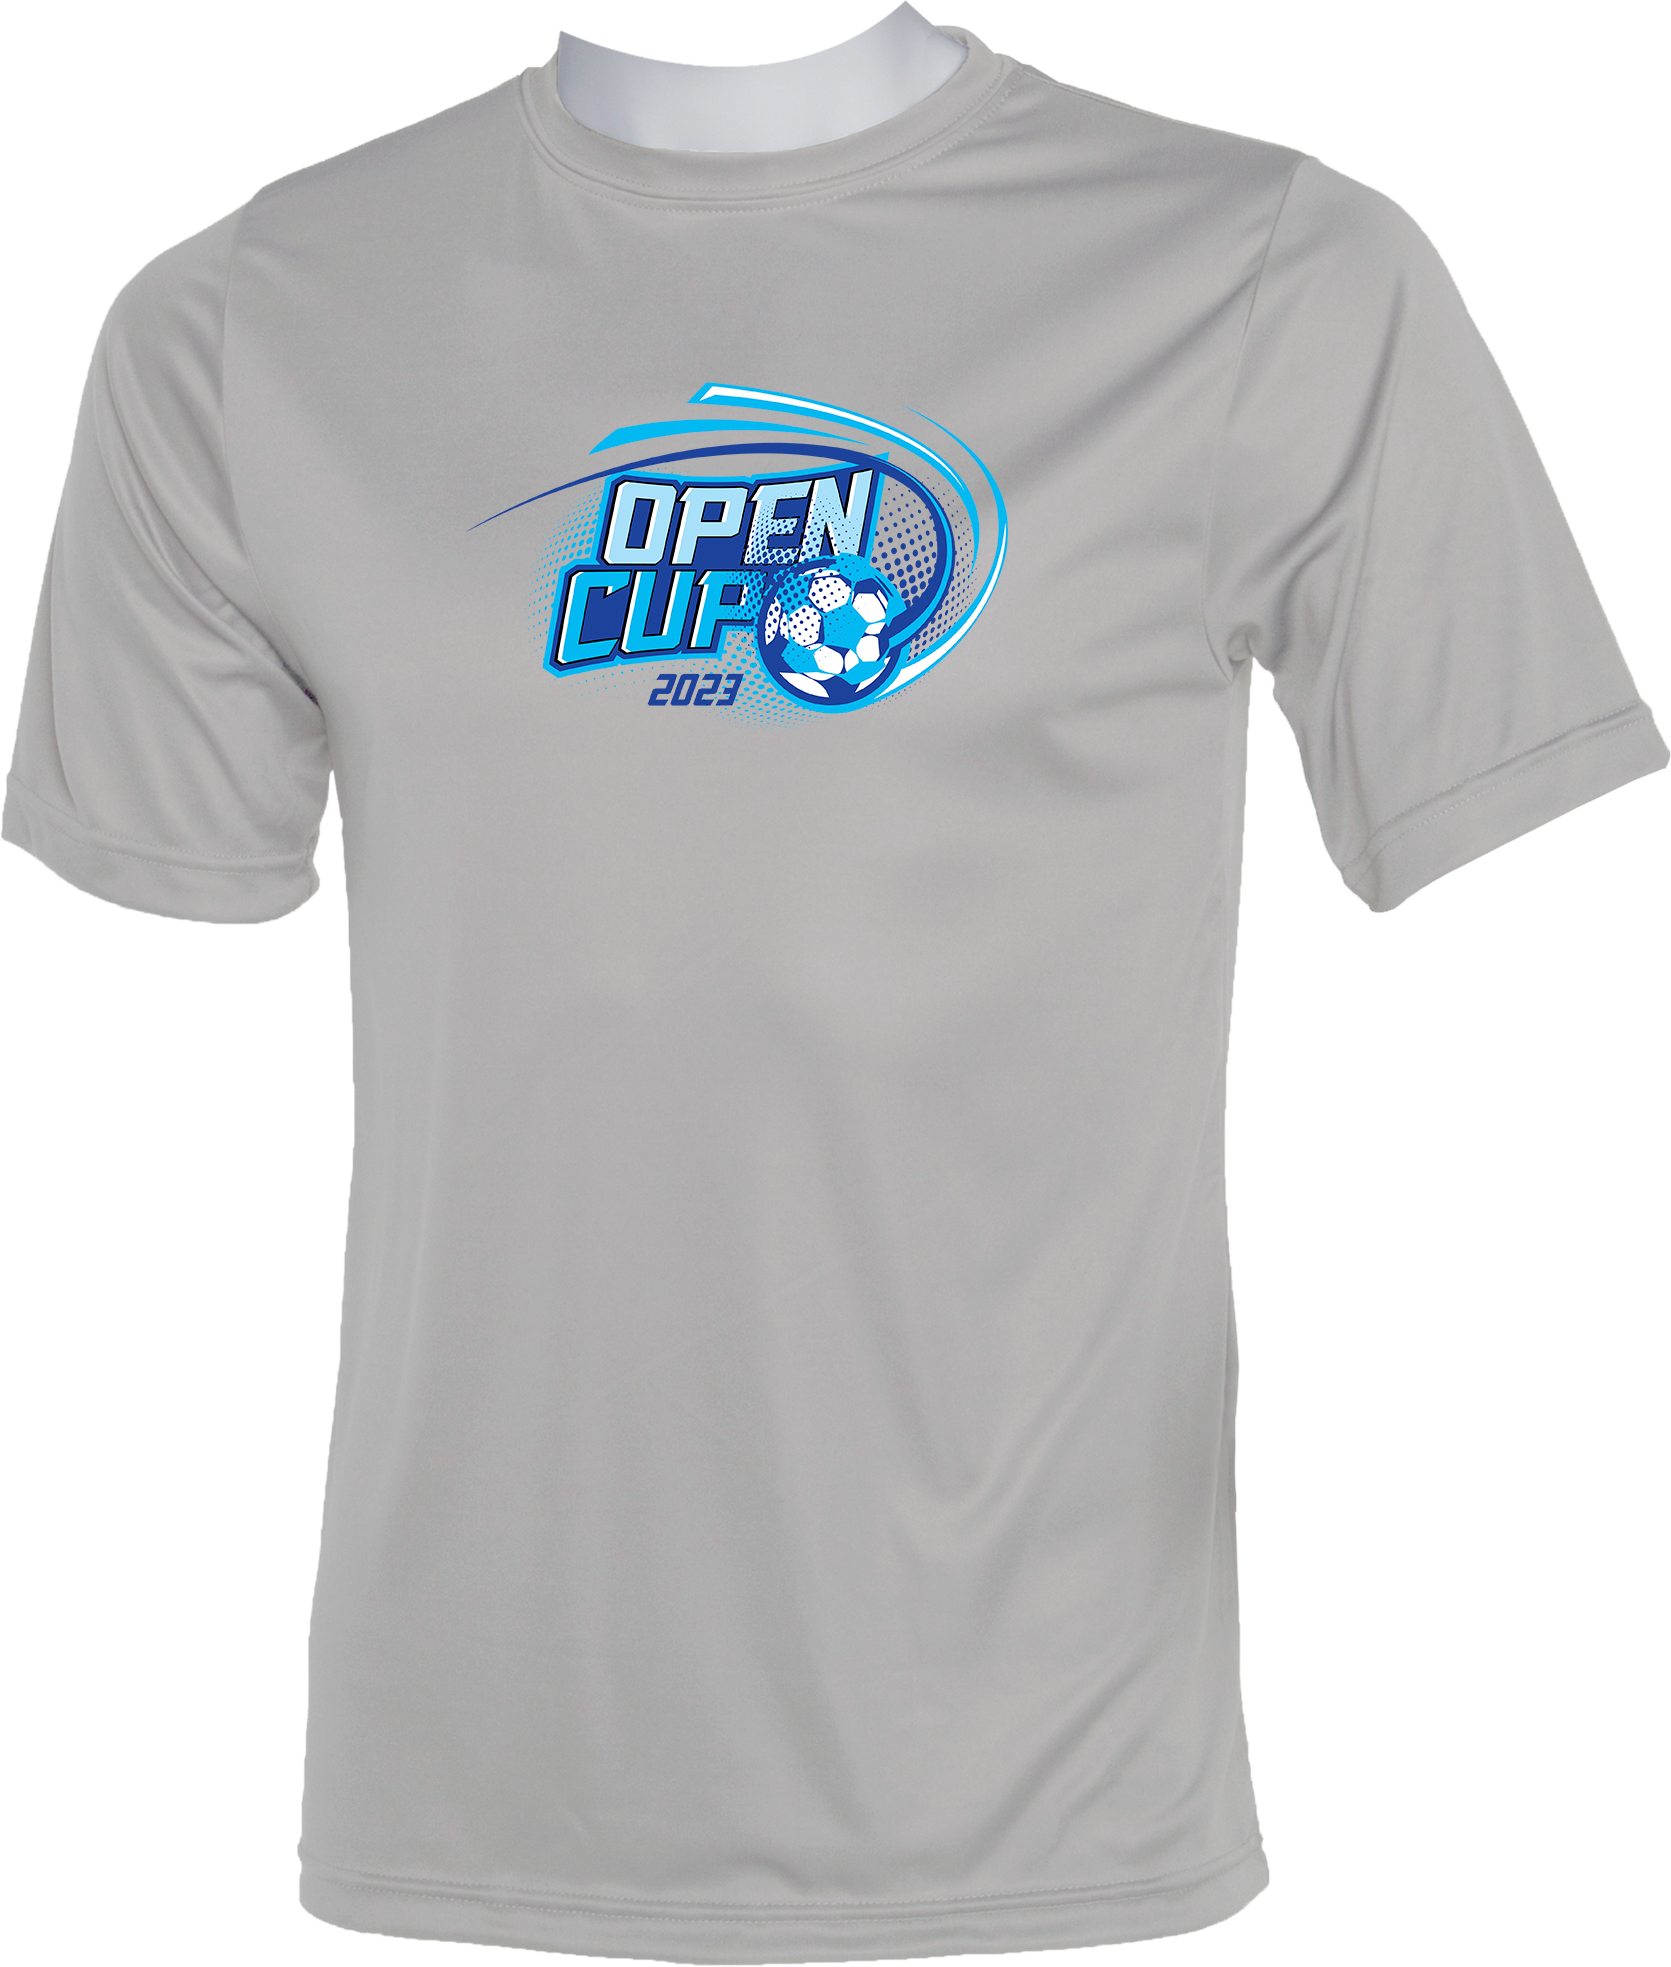 PERFORMANCE SHIRTS - 2023 Open Cup